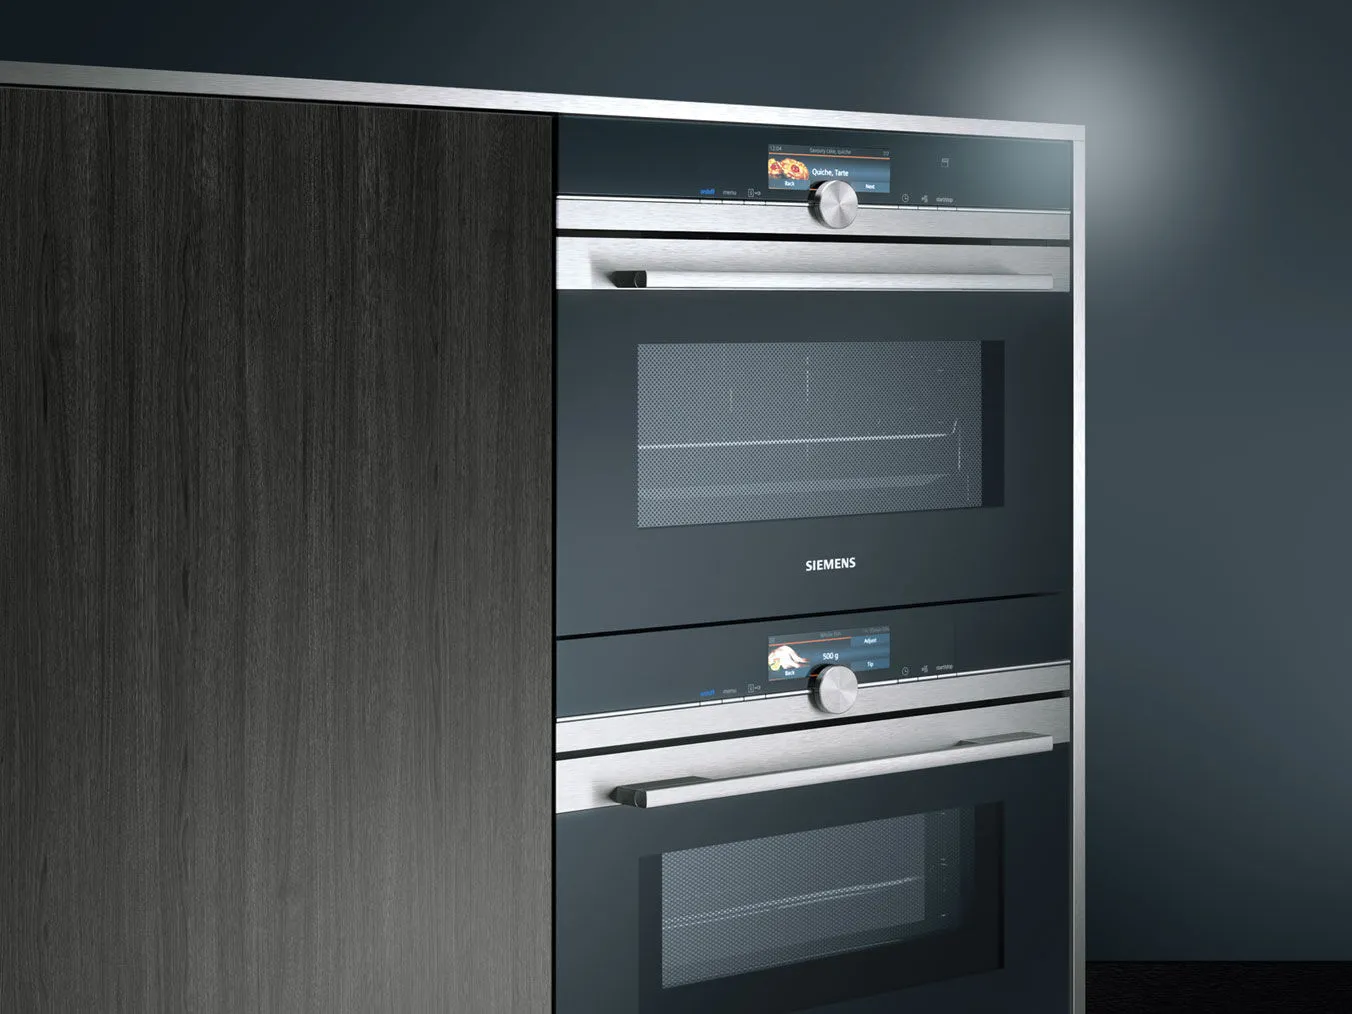 Siemens steam oven with sous-vide functionality